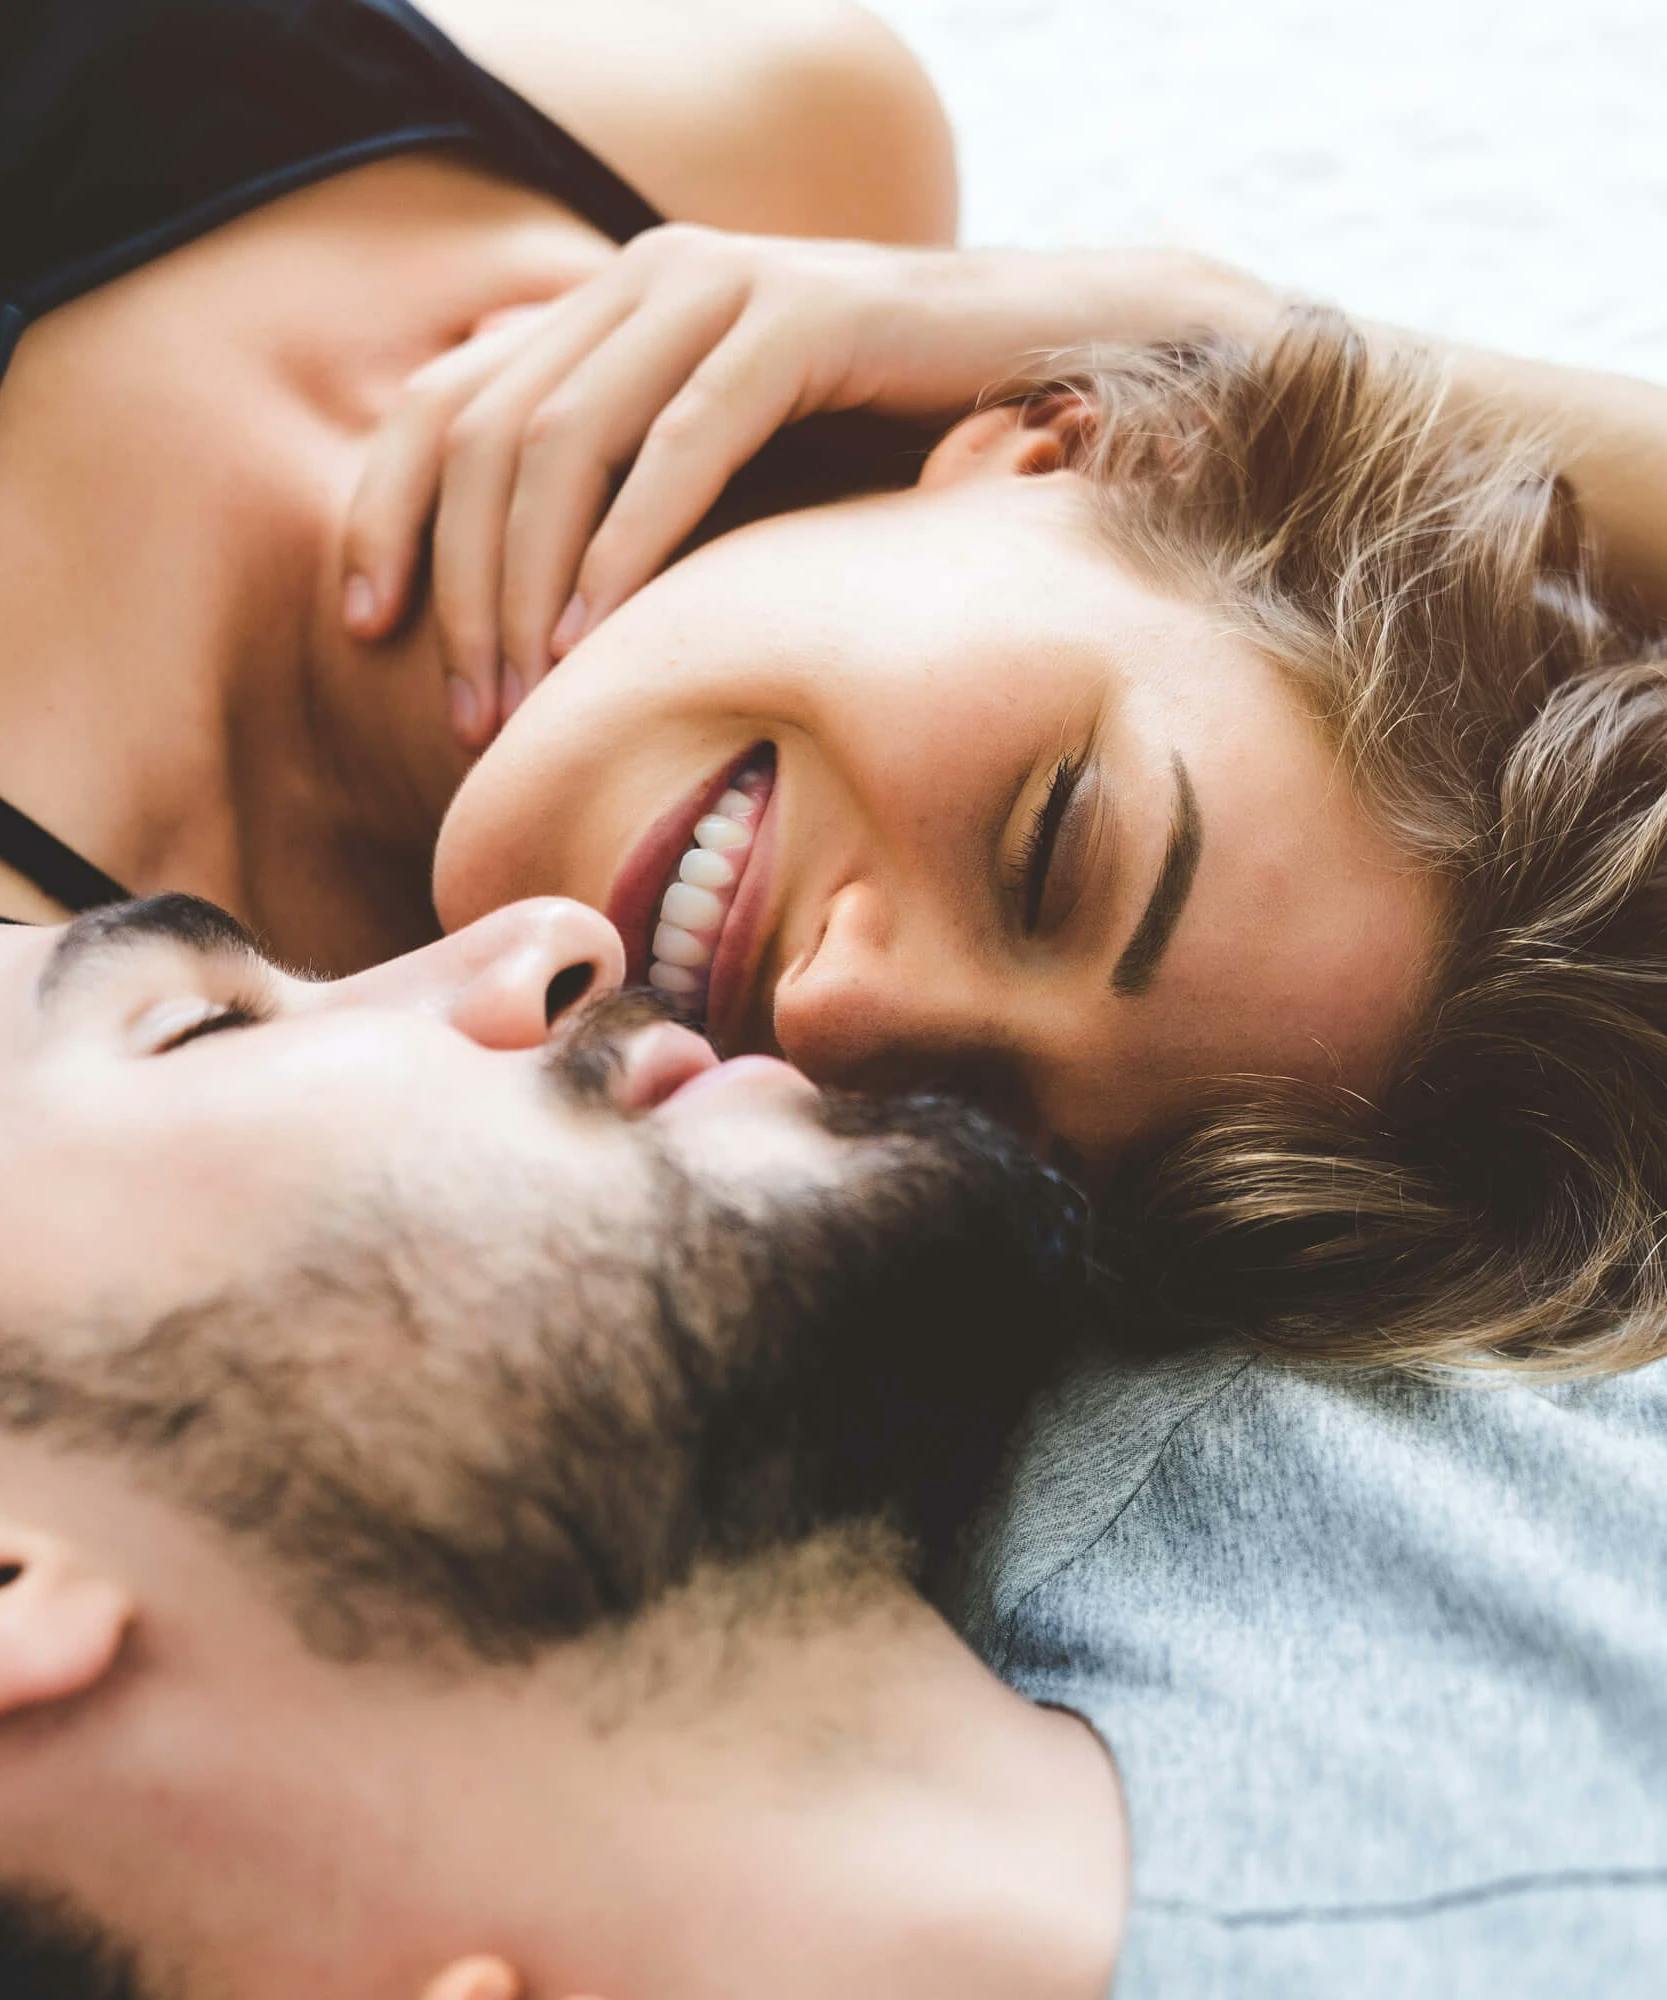 5 Practical (Beneficial) Reasons To Withhold Sex From The Men You Date